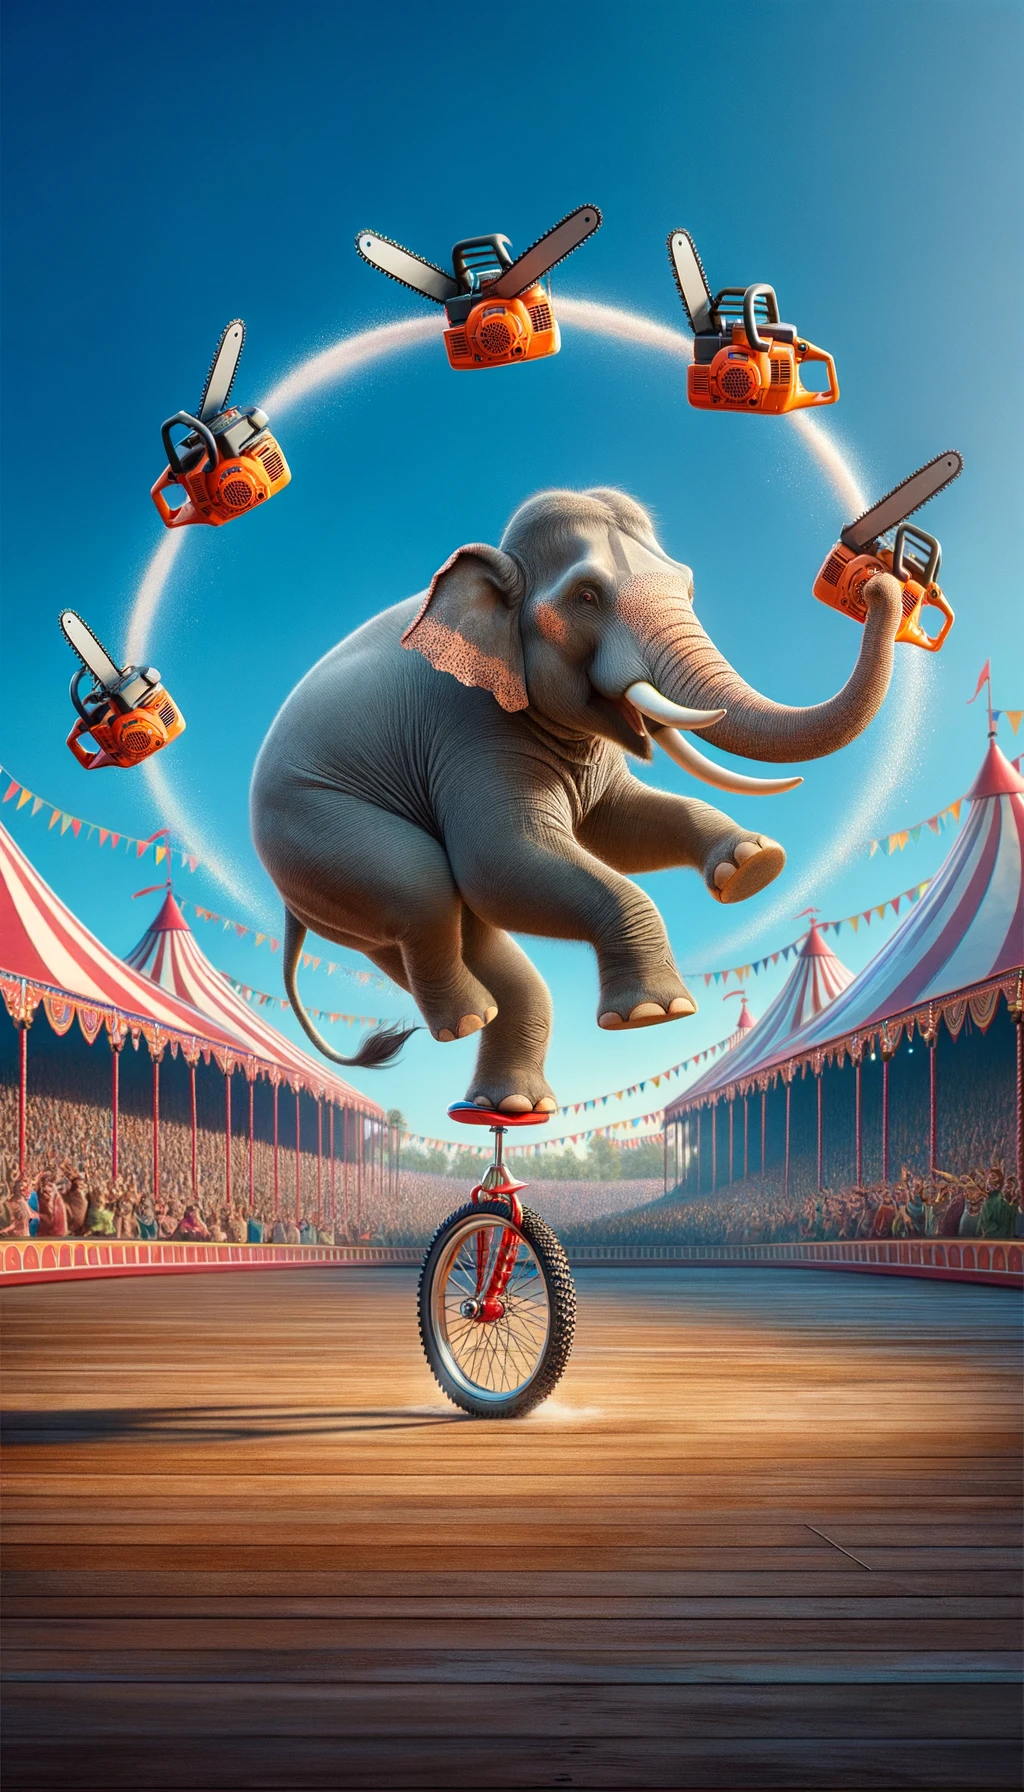 An elephant riding a unicycle while juggling chainsaws…